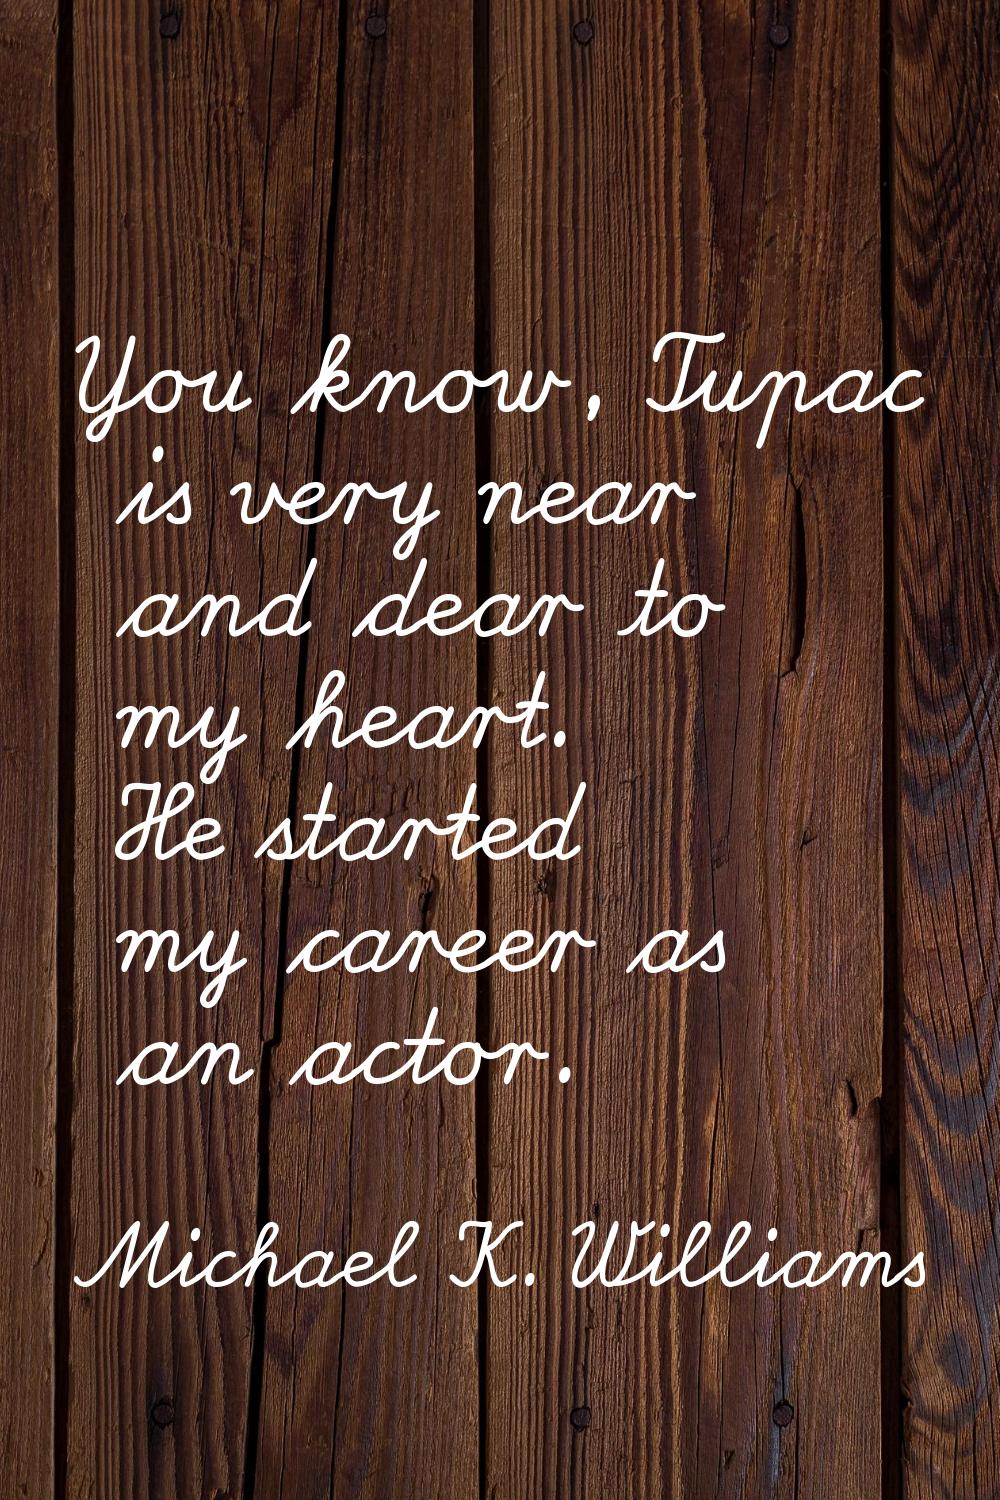 You know, Tupac is very near and dear to my heart. He started my career as an actor.